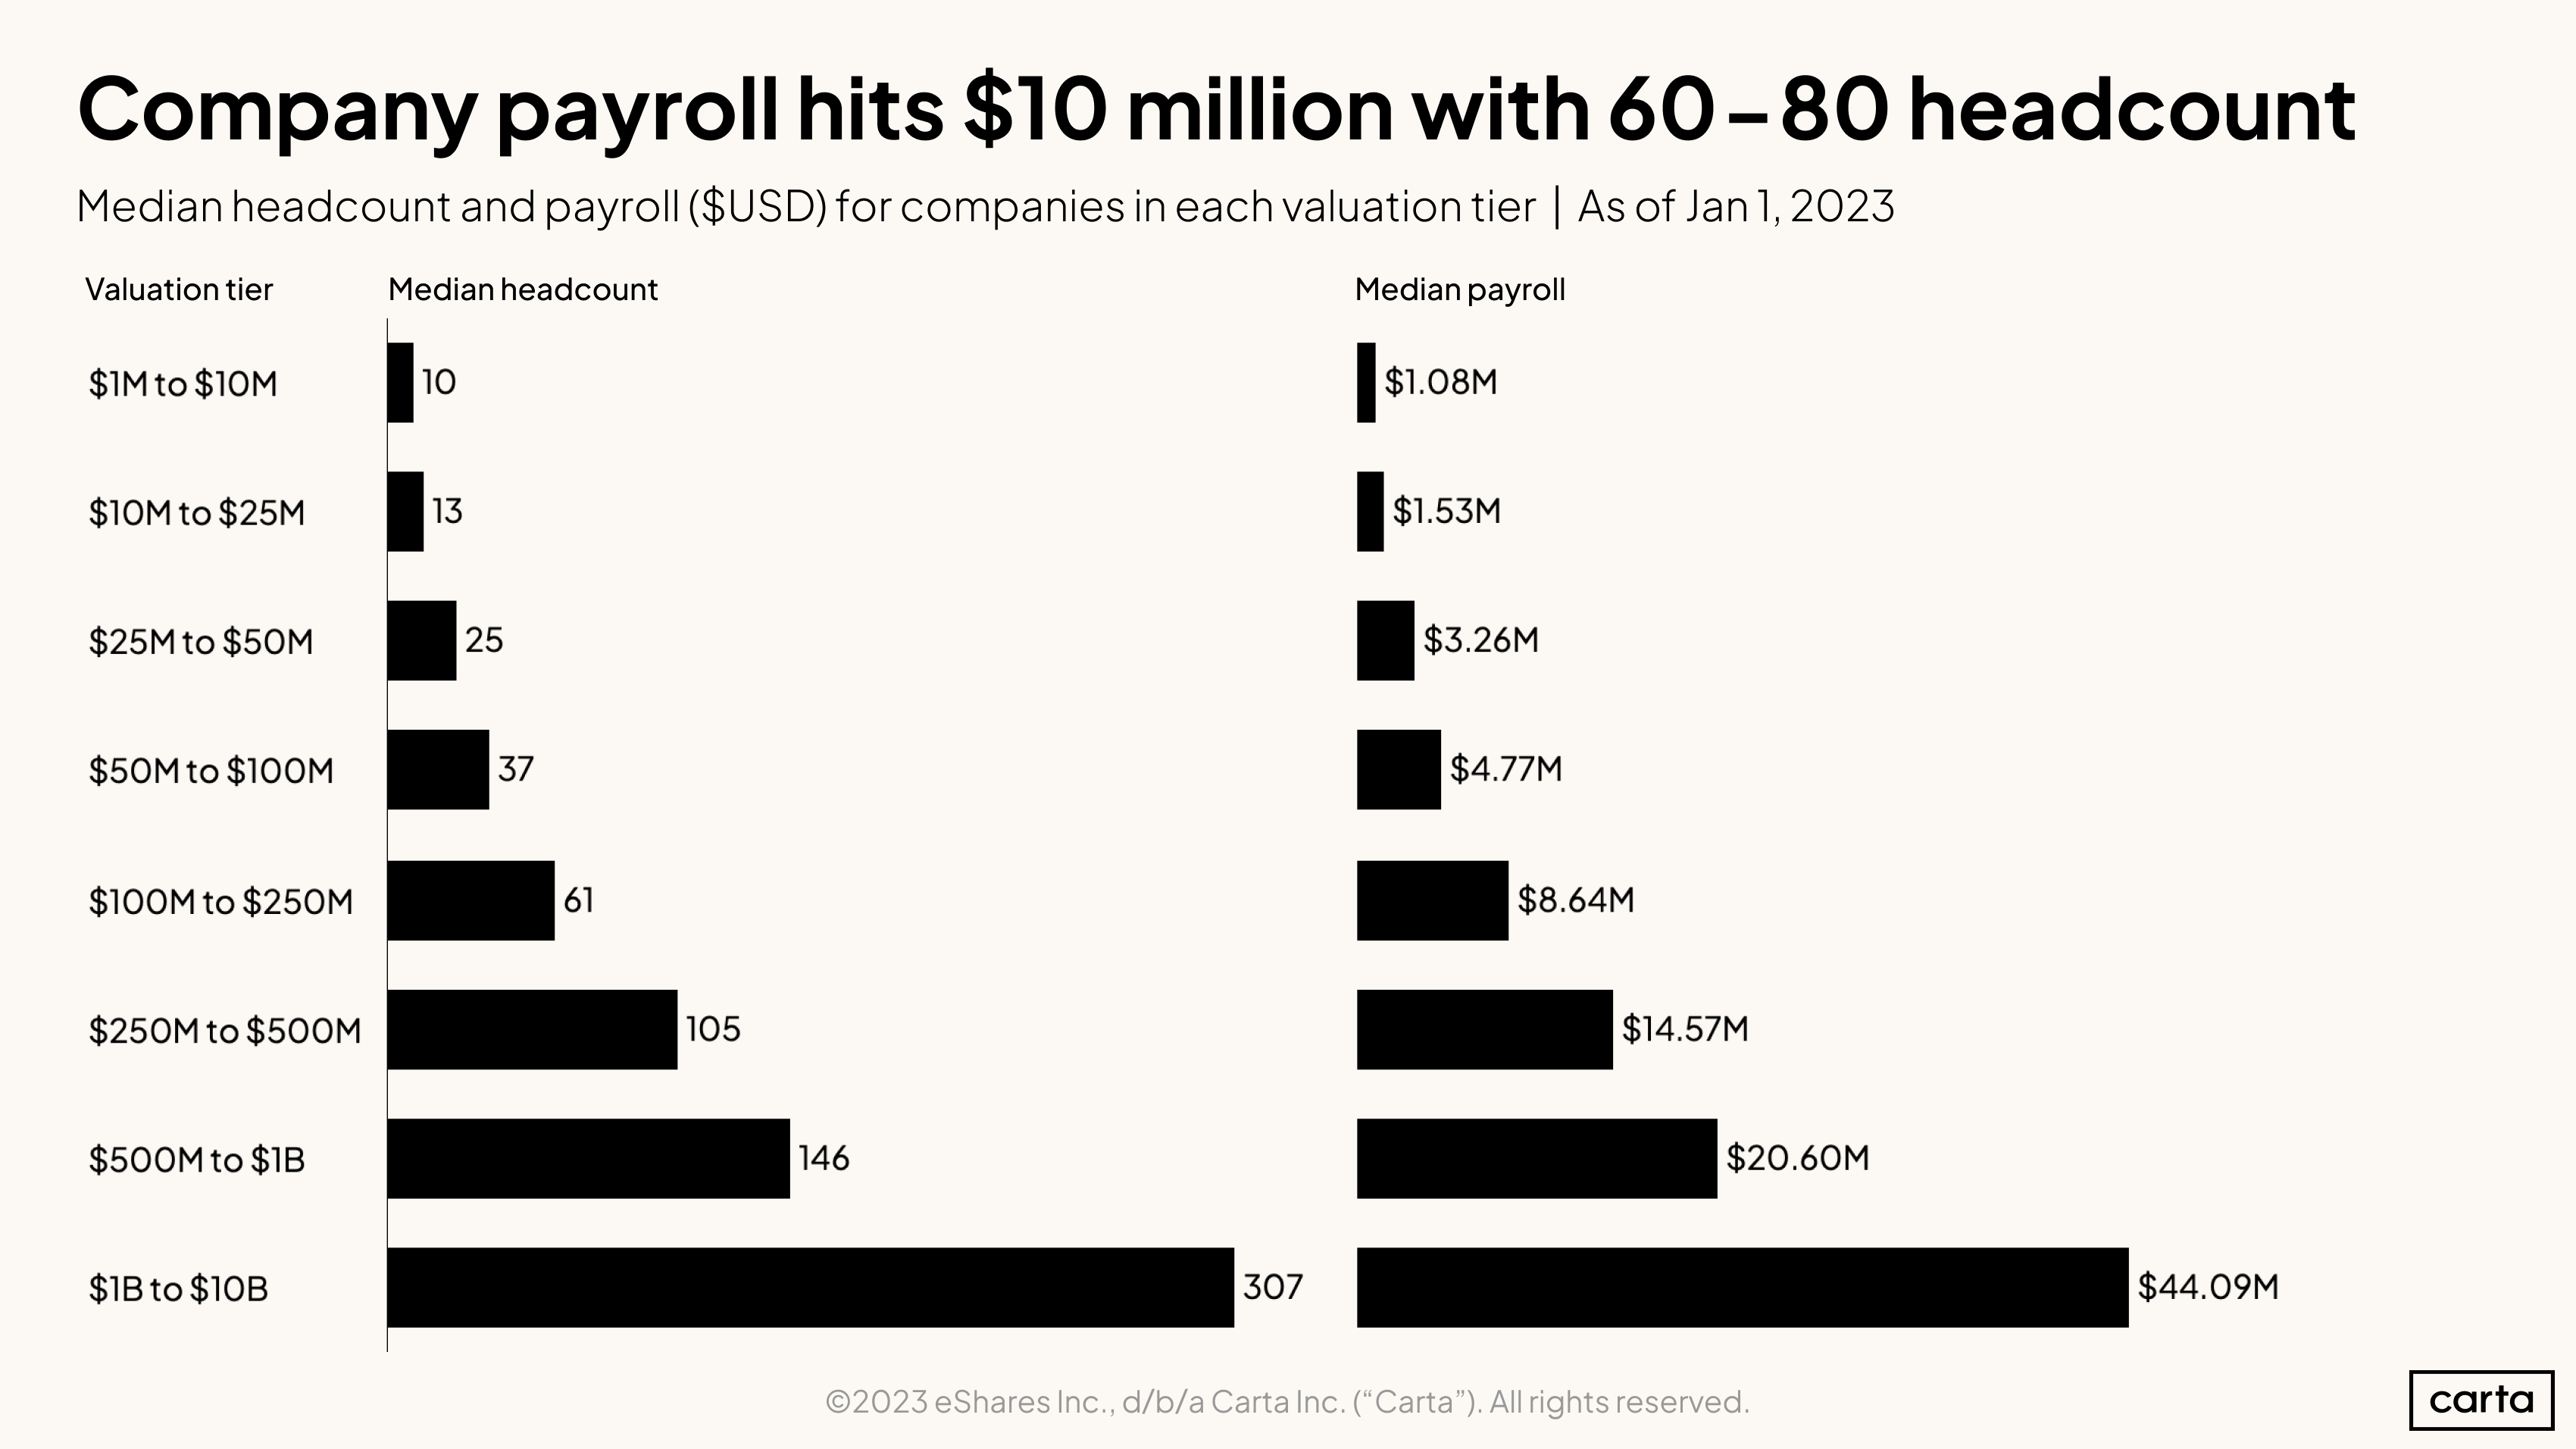 Median headcount and payroll ($USD) for companies in each valuation tier as of Jan 1, 2023